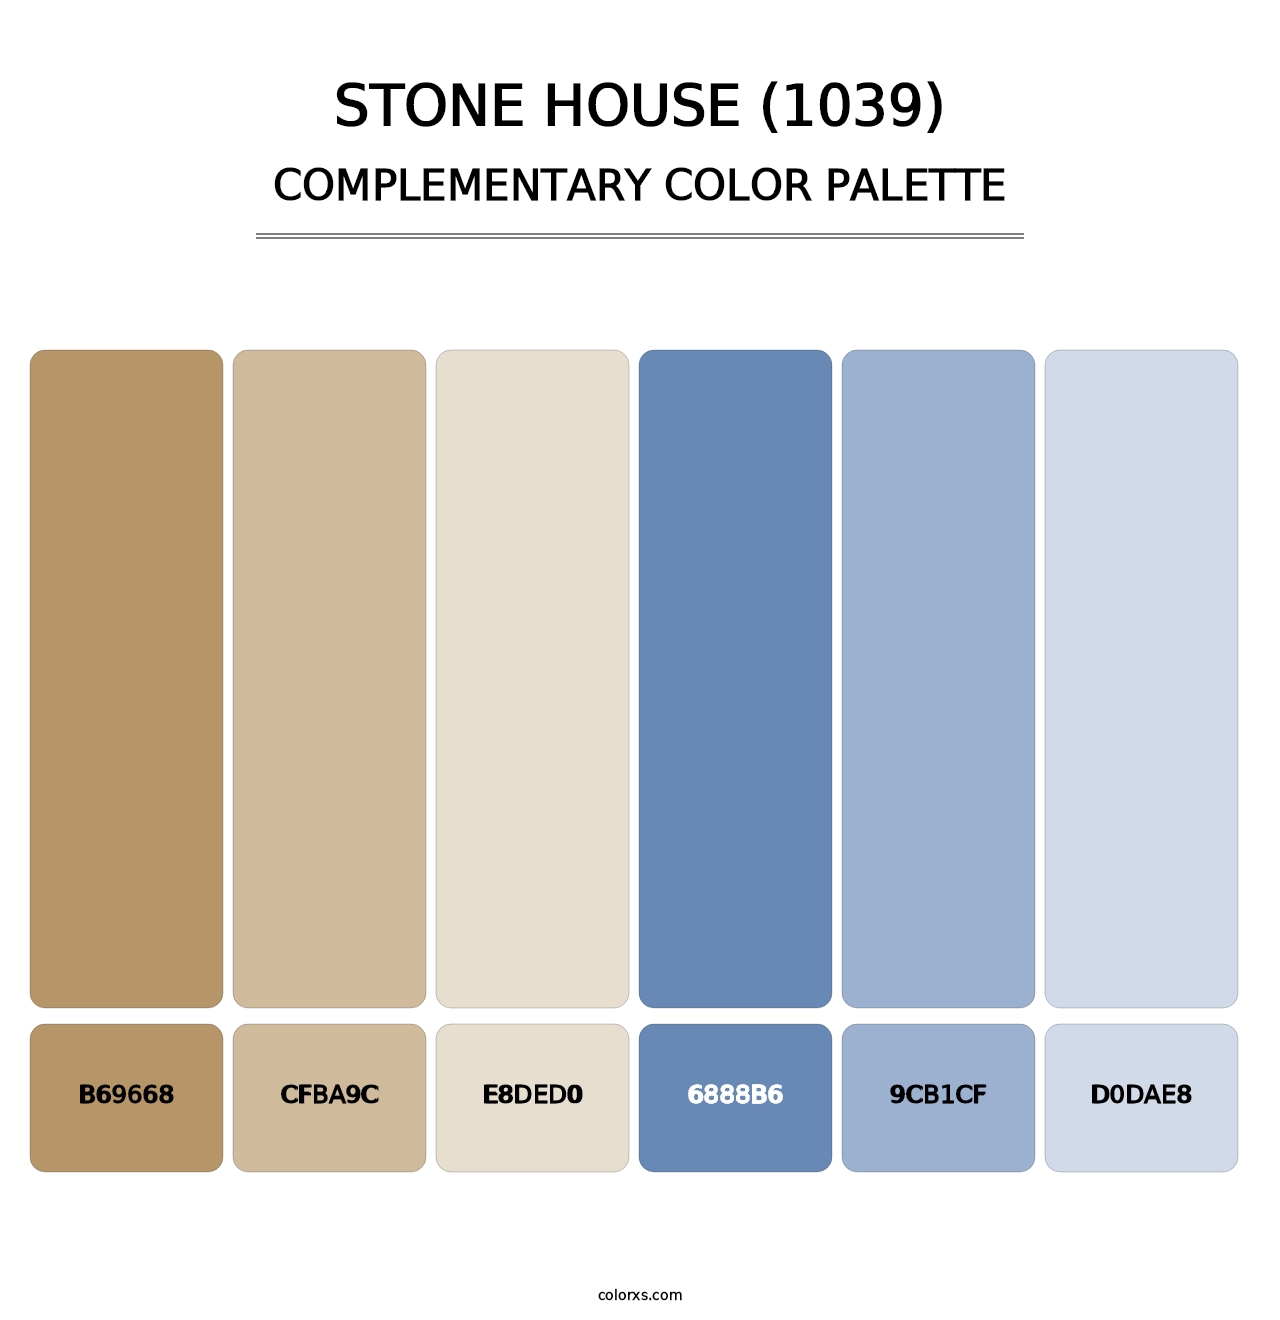 Stone House (1039) - Complementary Color Palette